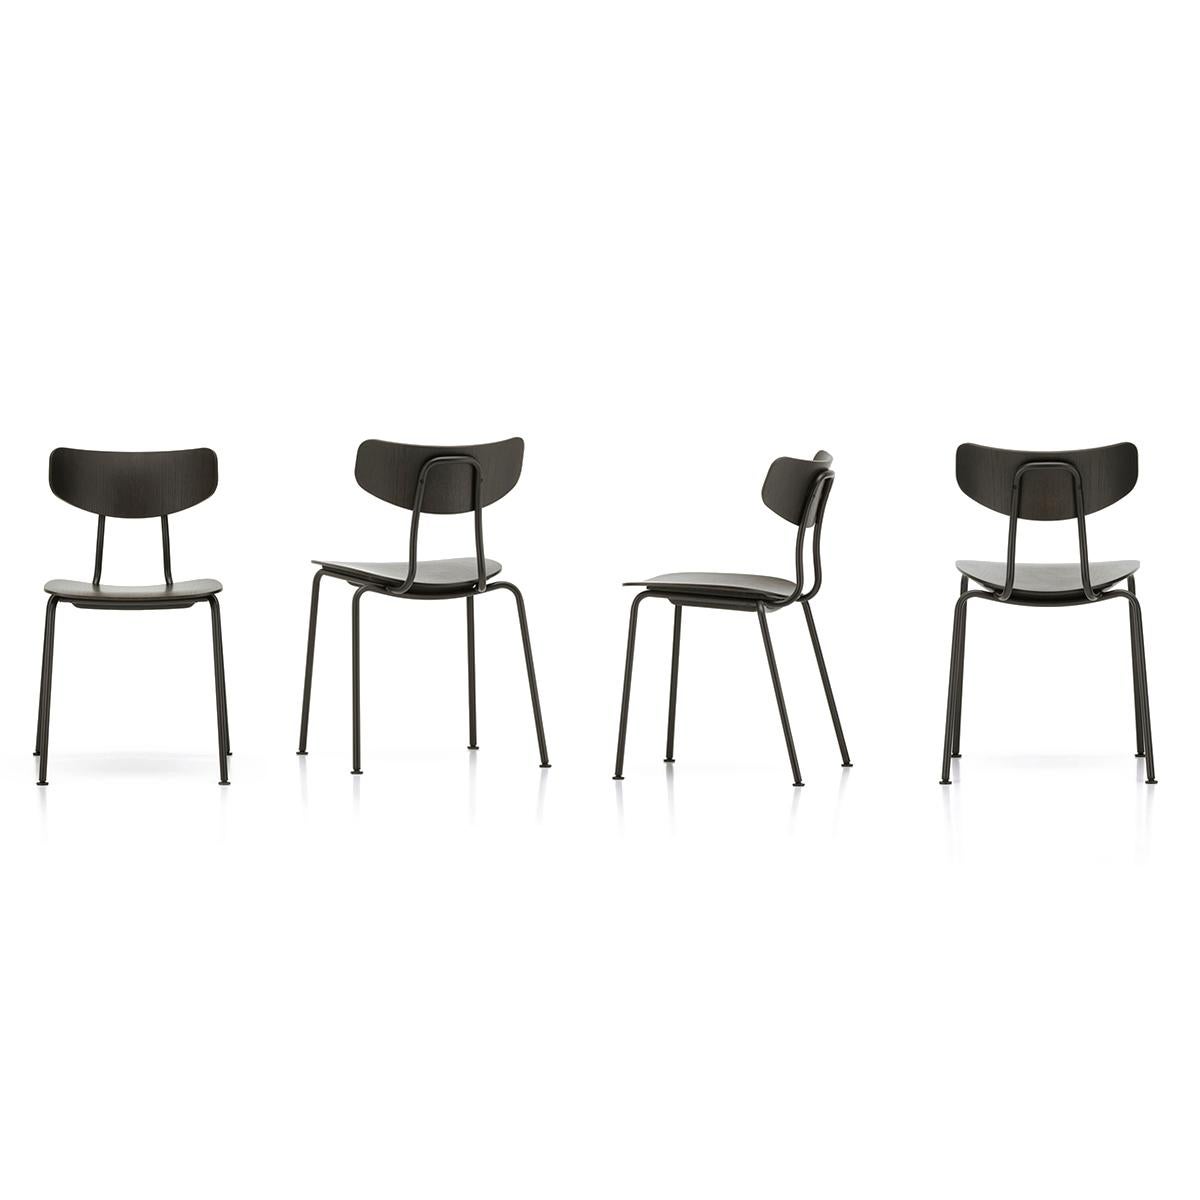 Chairs designed by Jasper Morrison in 2000.
Manufactured by Vitra, Switzerland.

Jasper Morrison continues his 'super normal' design approach with Moca, combining an understated aesthetic with robust high-quality materials to create an extremely